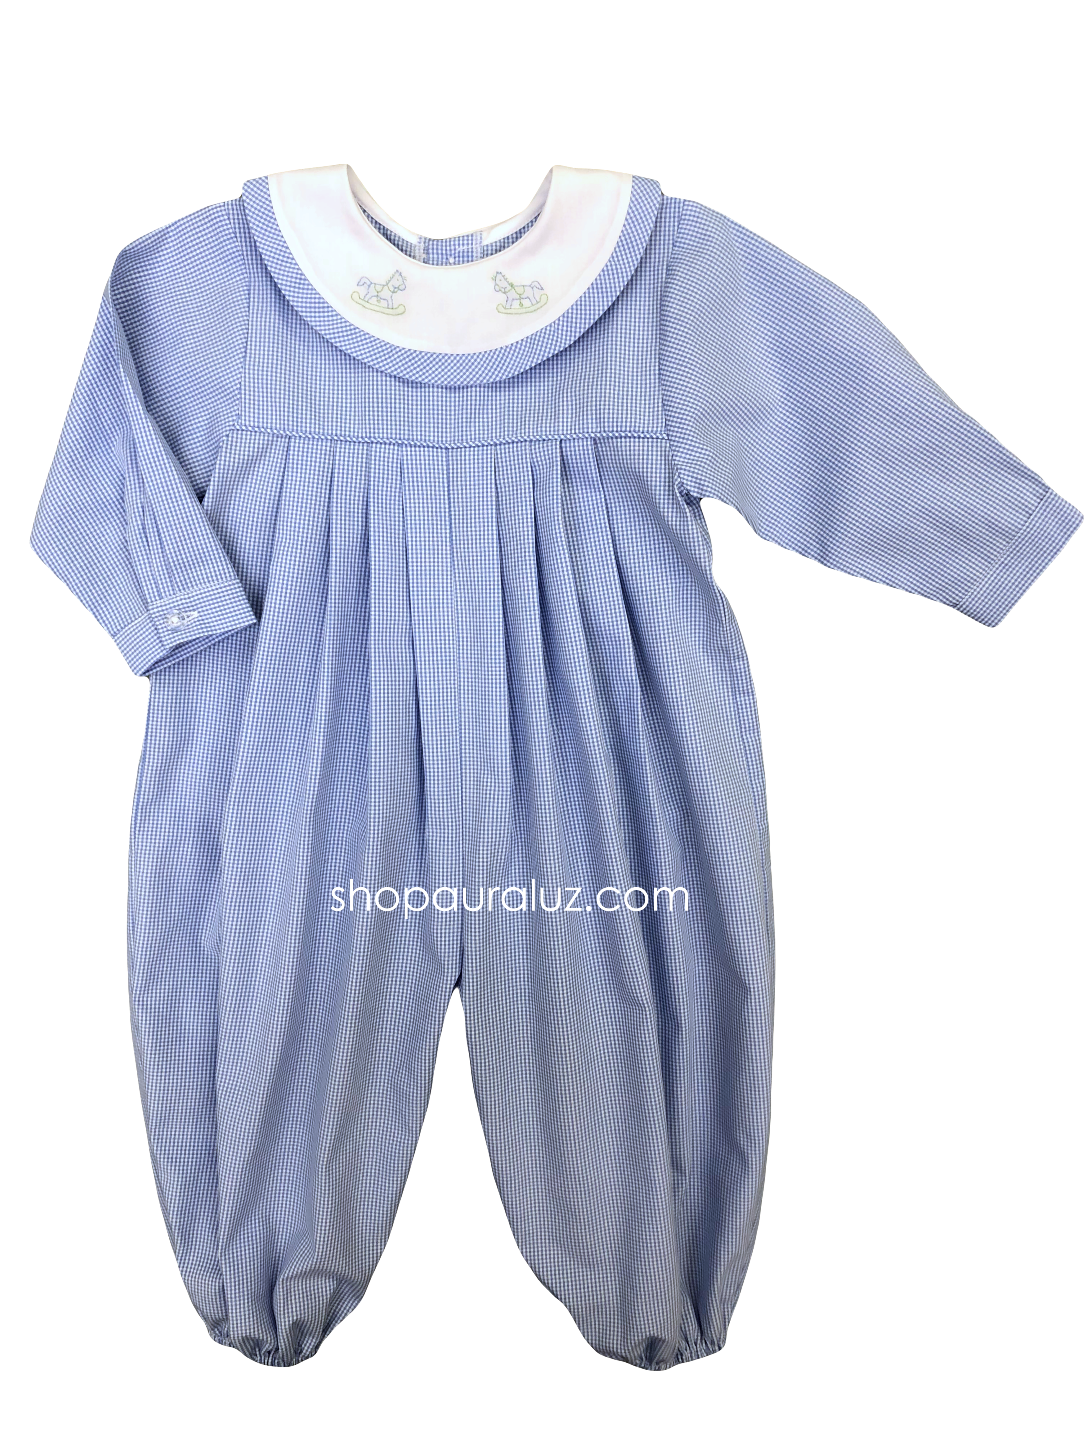 Auraluz Boy Longall...Blue micro check w/round collar and embroidered rocking horses